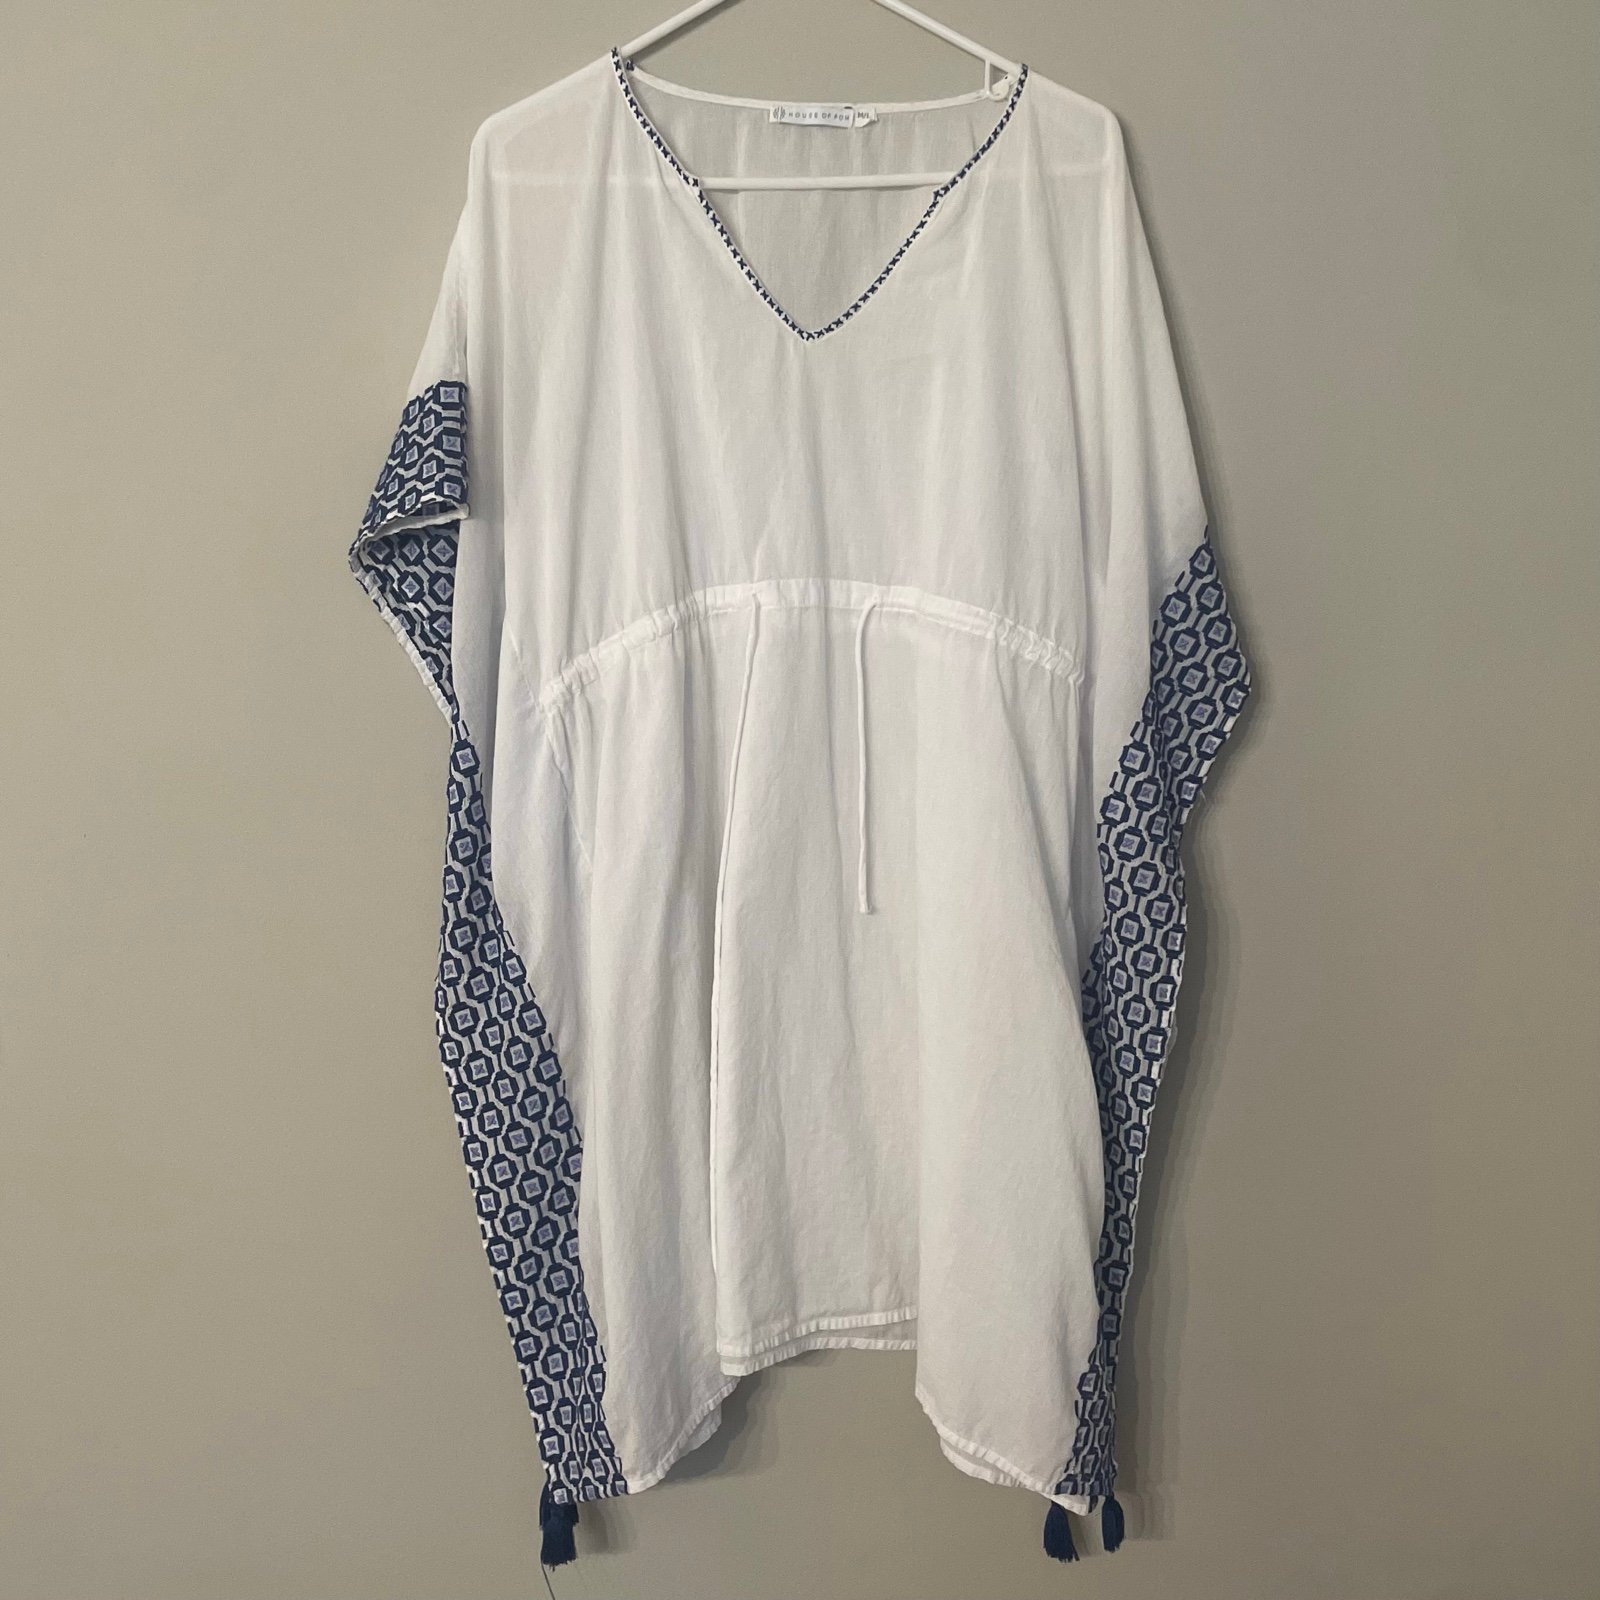 Authentic Women’s Anthropologie House of Pom Swim Coverup White and Blue Medium / Large FgLKj6s2G just for you